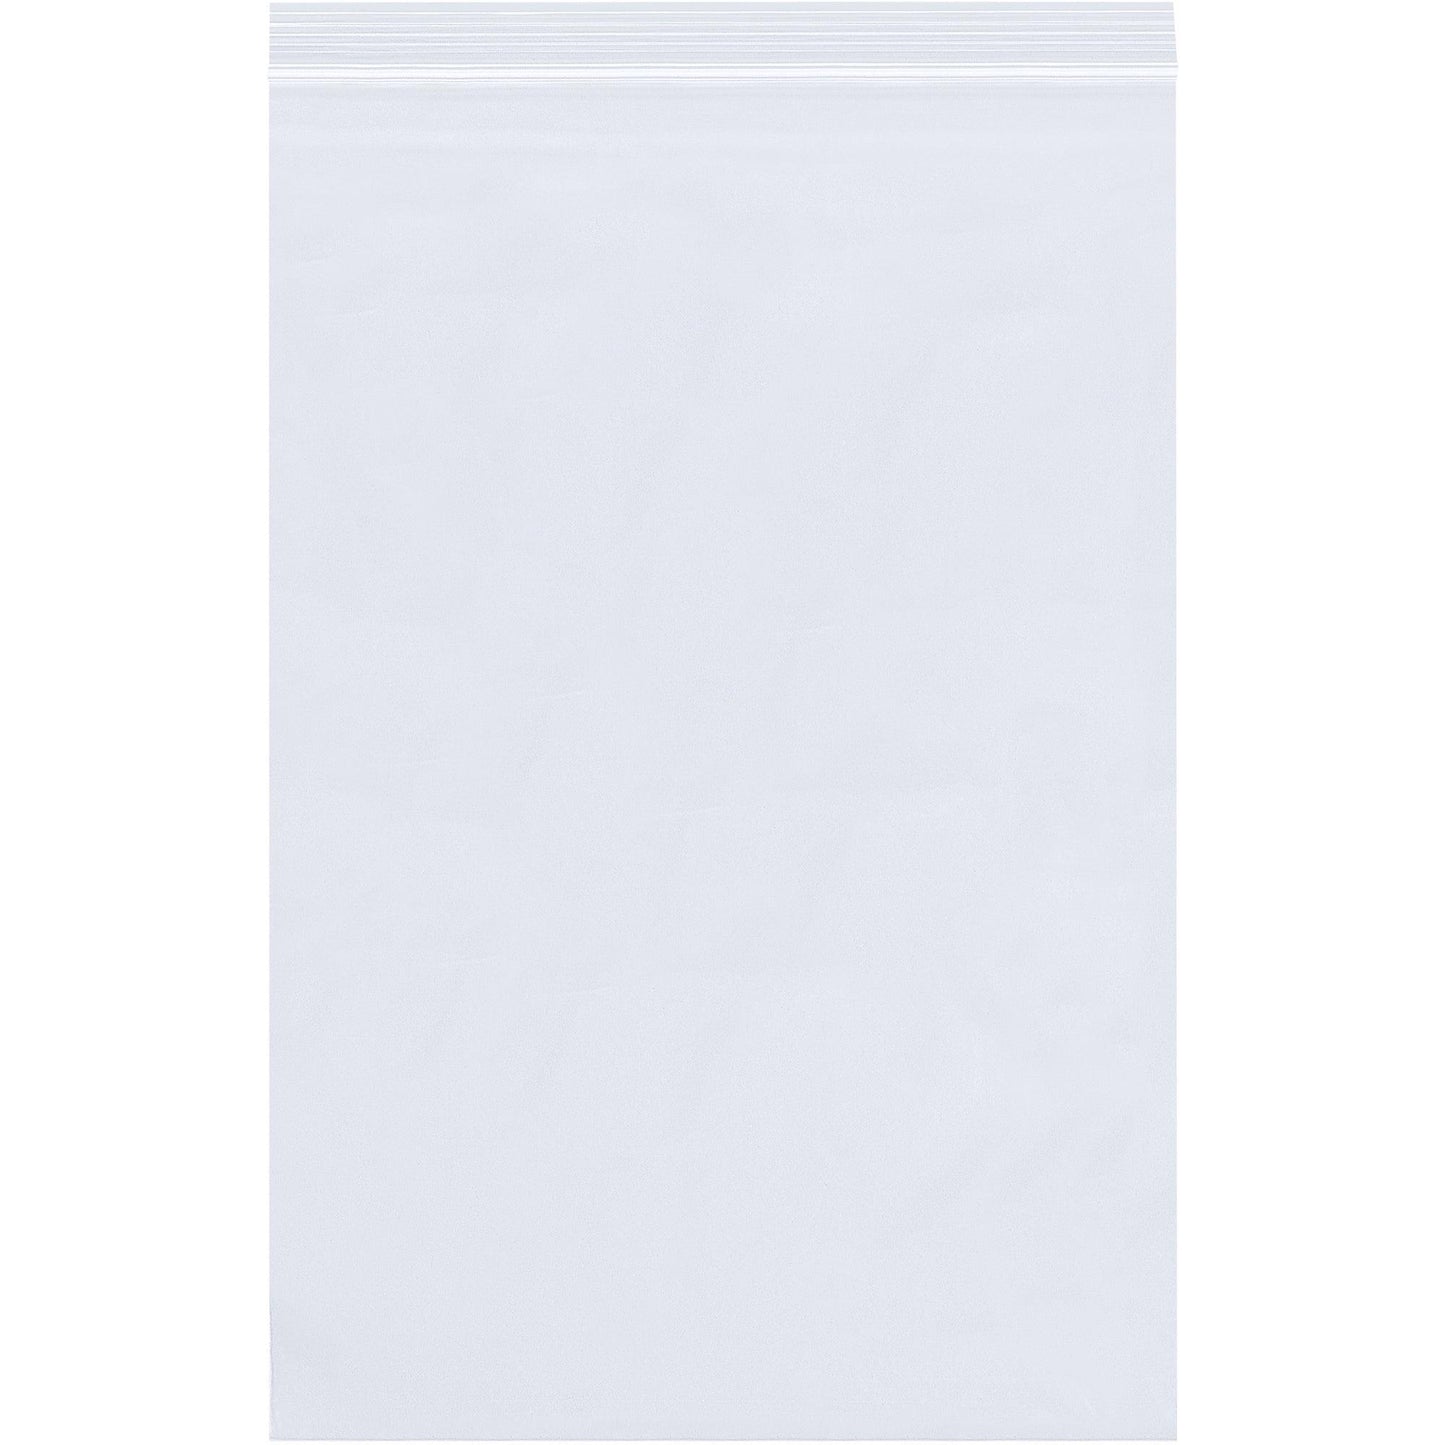 16 x 20" - 2 Mil Reclosable Poly Bags - PB3683